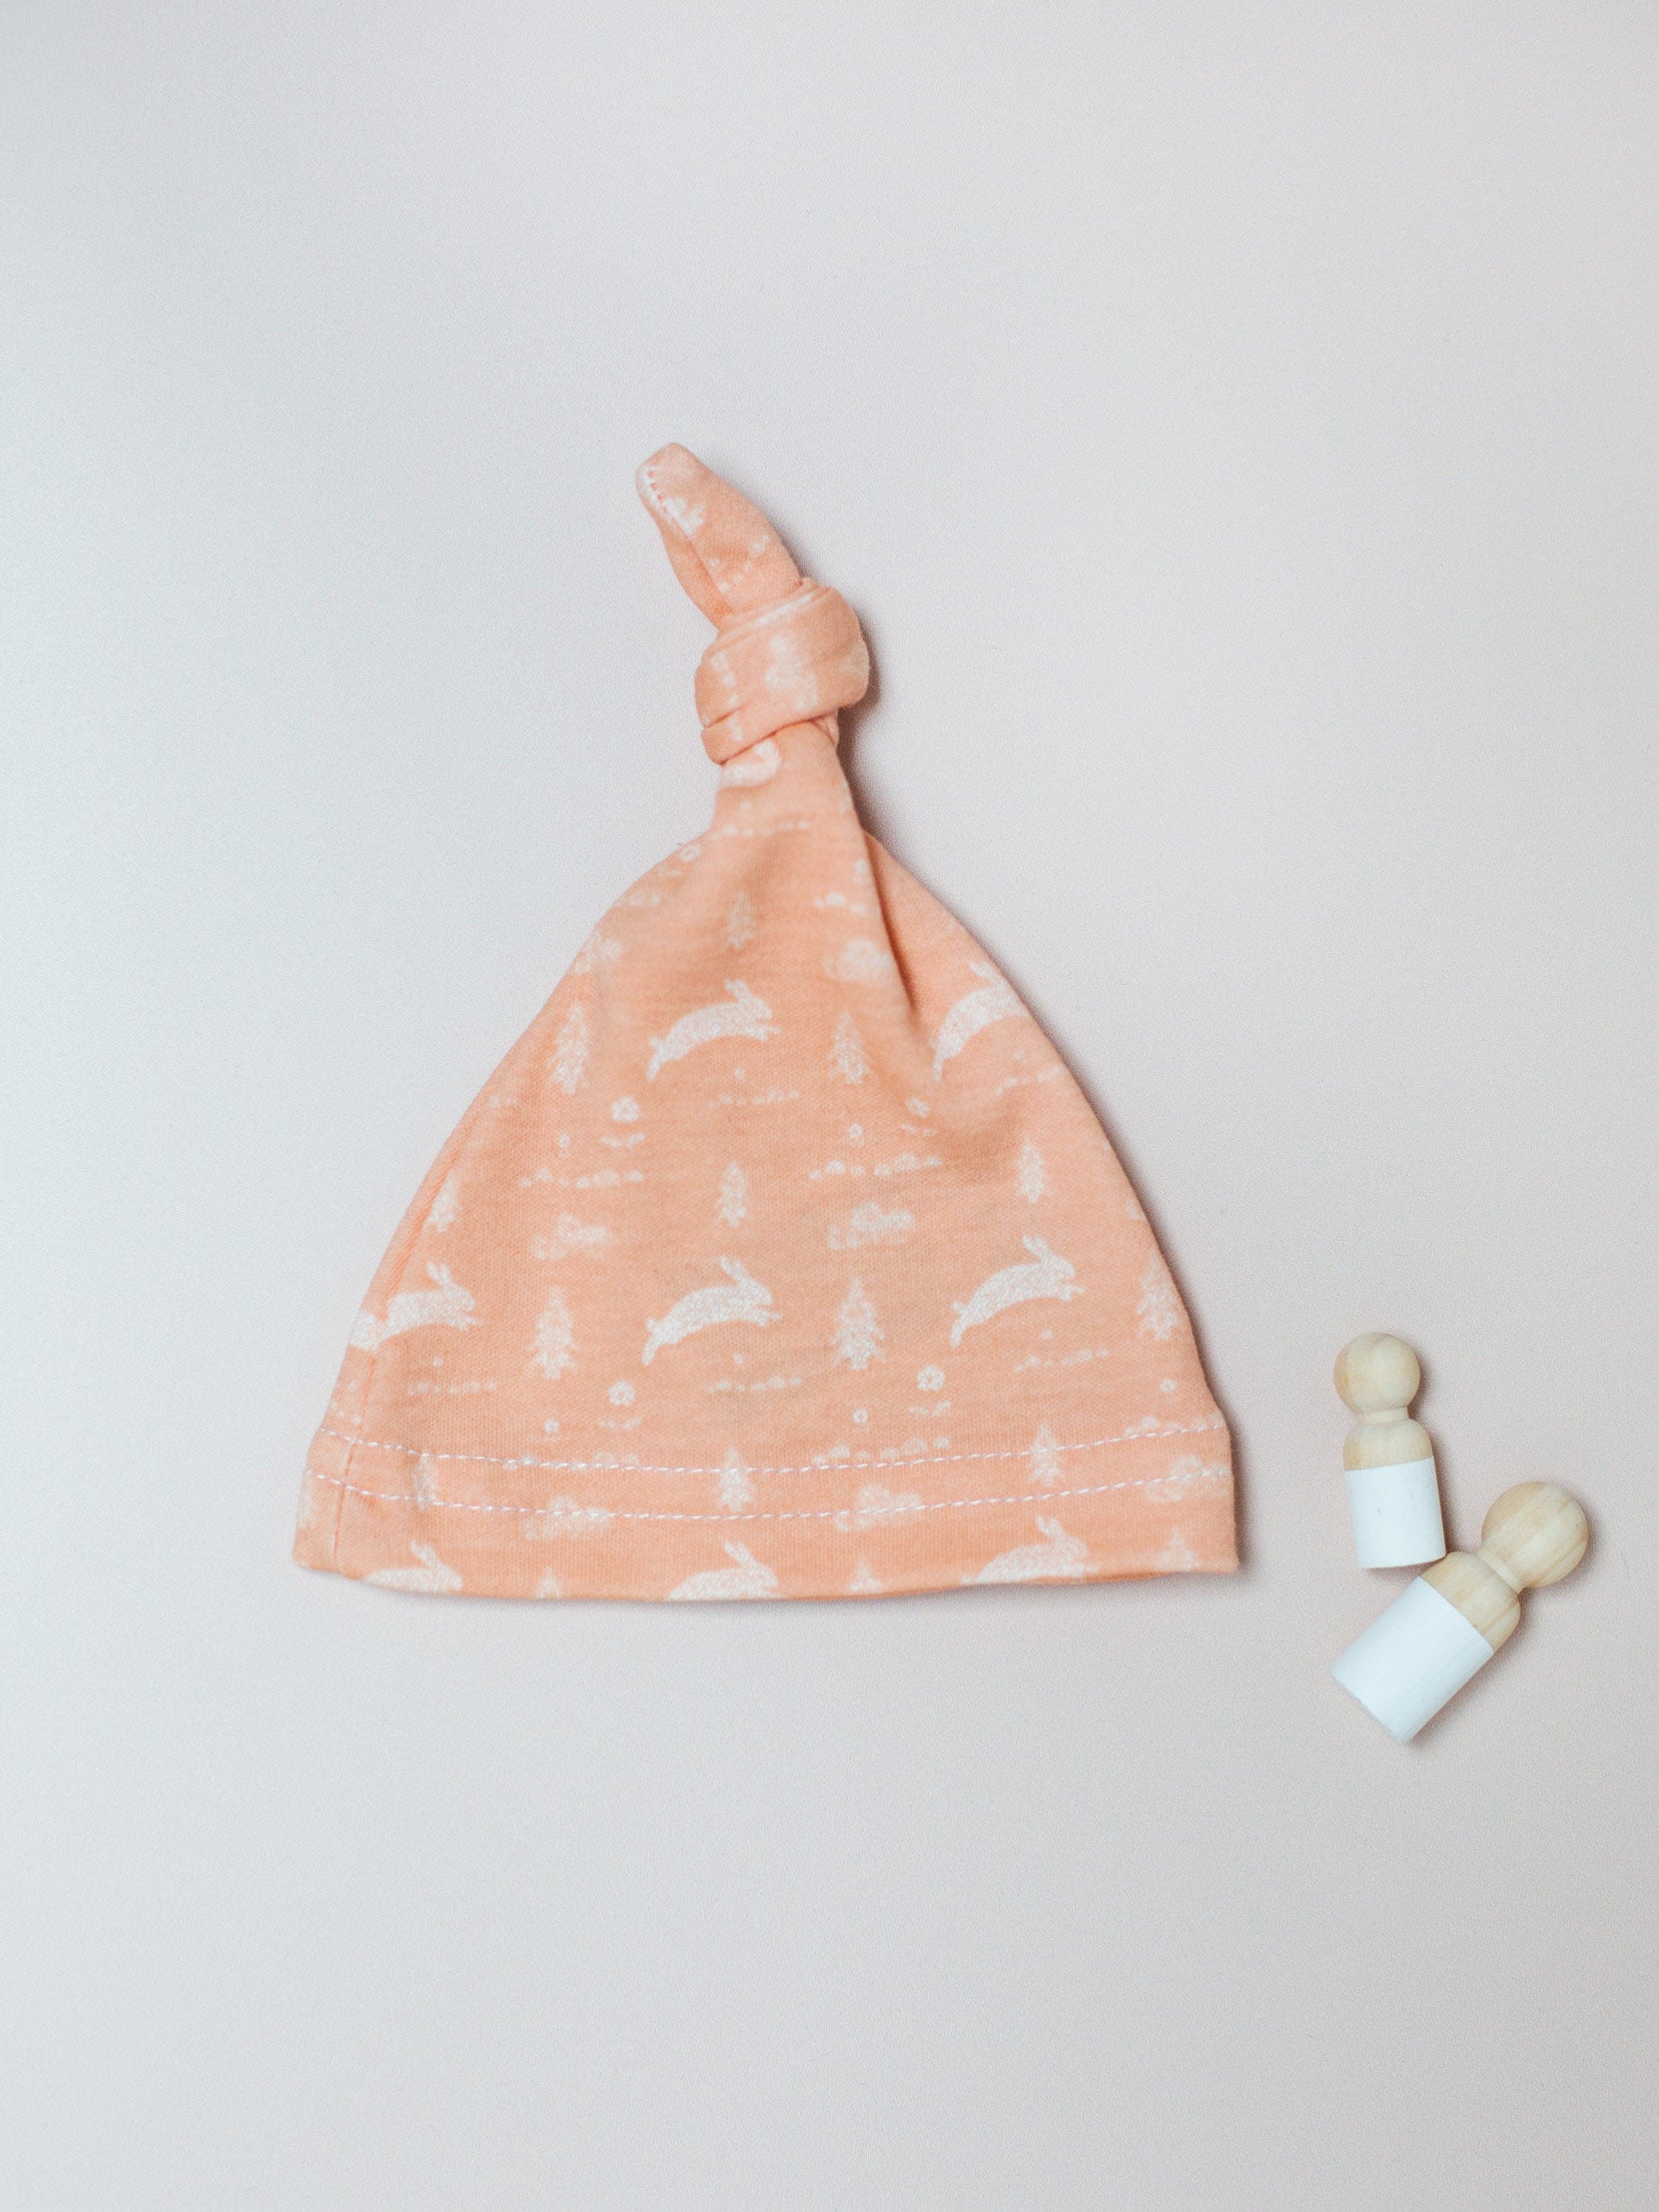 Knotted Hat, Leaping Bunnies, Premium 100% Organic Cotton - Hat - Tiny & Small